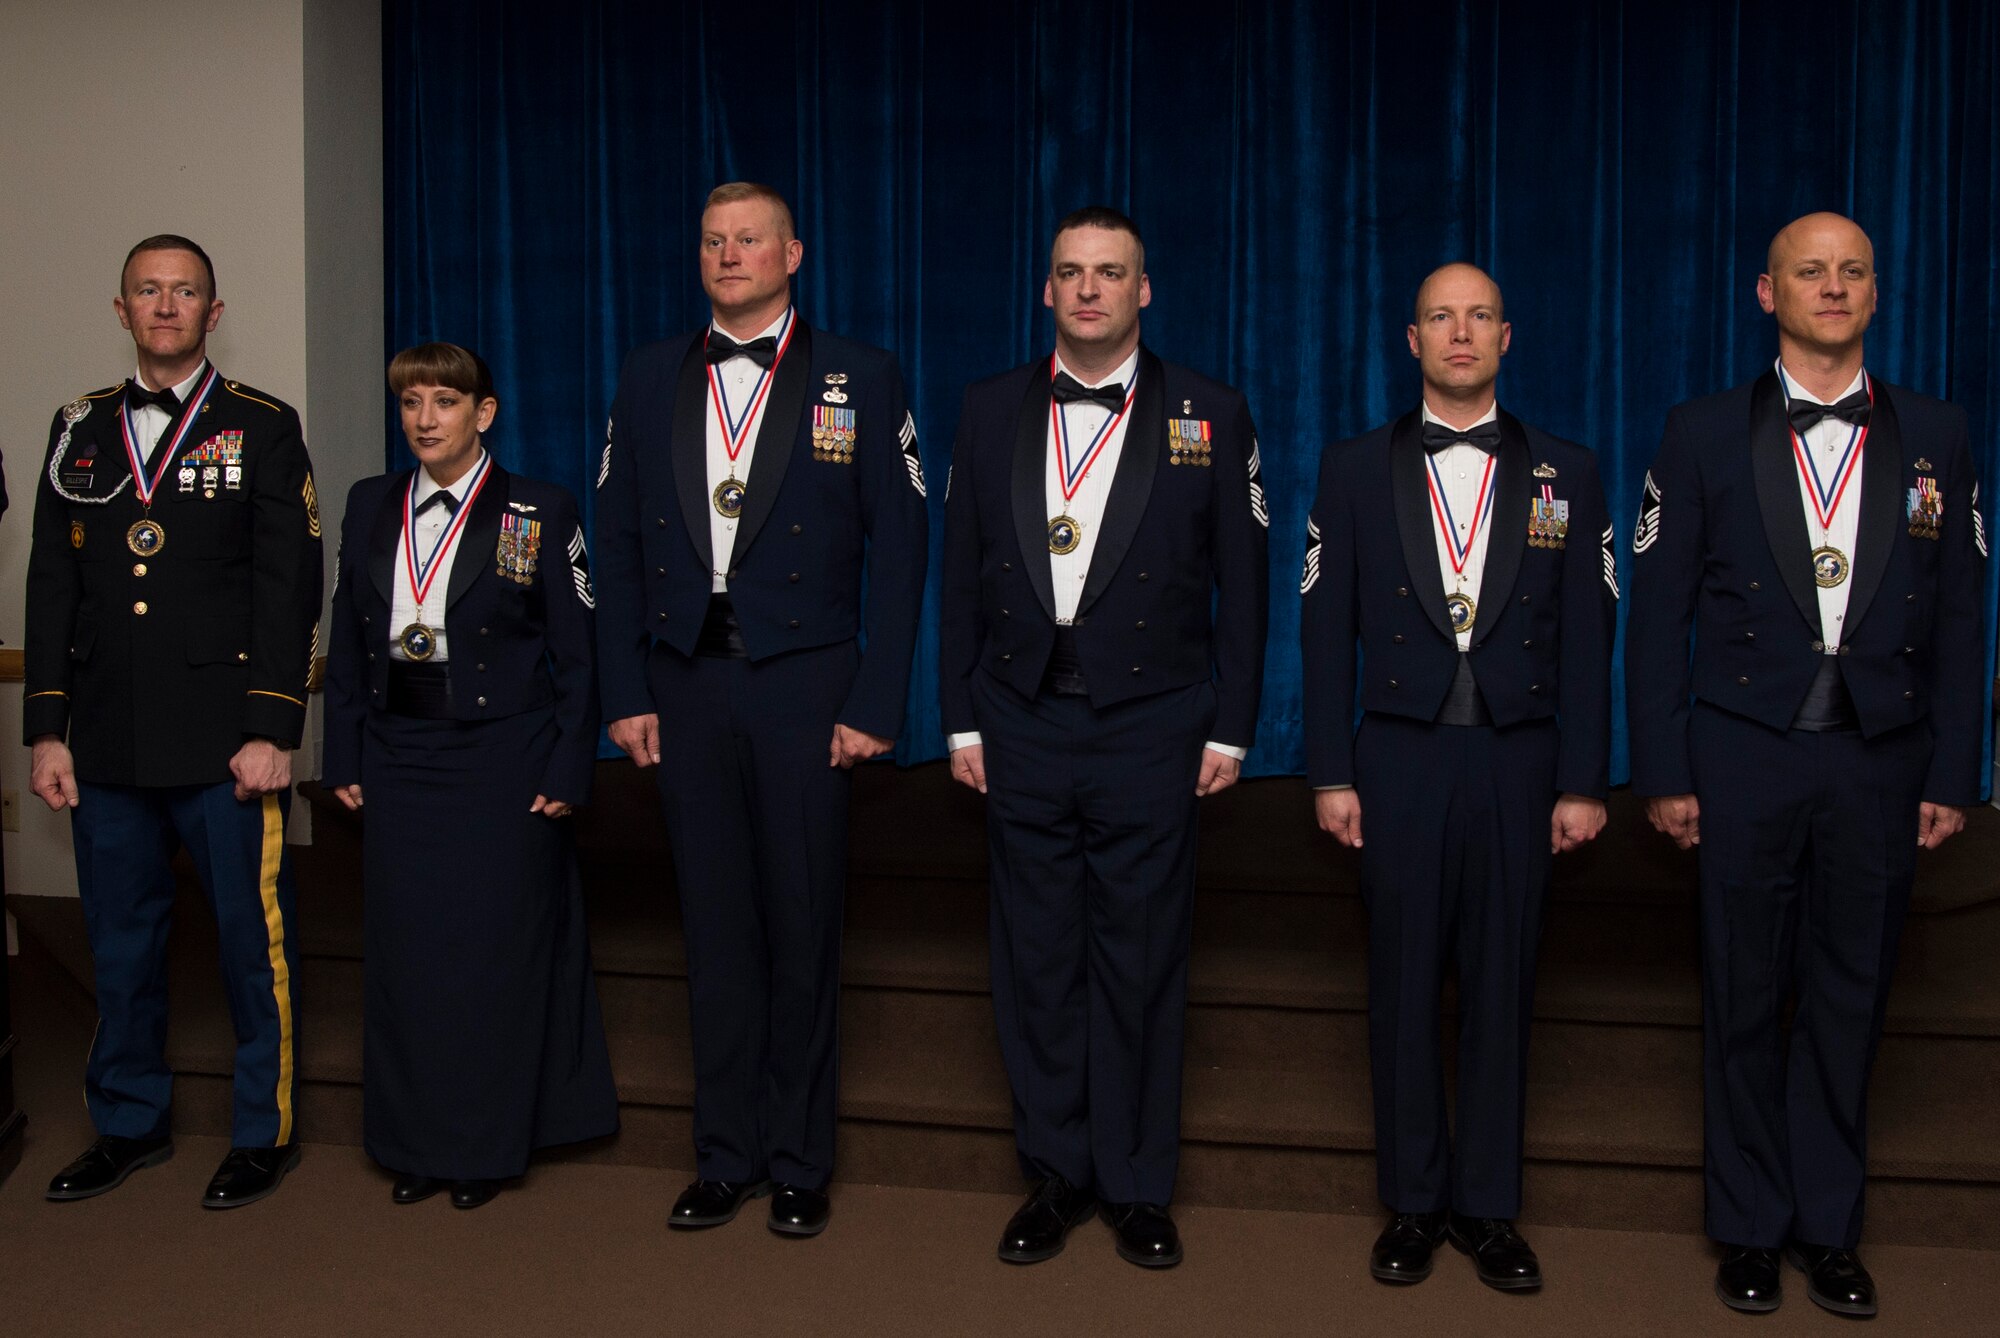 Army and Air Force service members are introduced to the audience at the Trail’s End Event Center during a chief master sergeant and sergeant major induction ceremony on F.E. Warren Air Force Base, March 10, 2017. The induction ceremony recognizes those individuals who have achieved the highest rank in the enlisted force. (U.S. Air Force photo by Staff Sgt. Christopher Ruano)